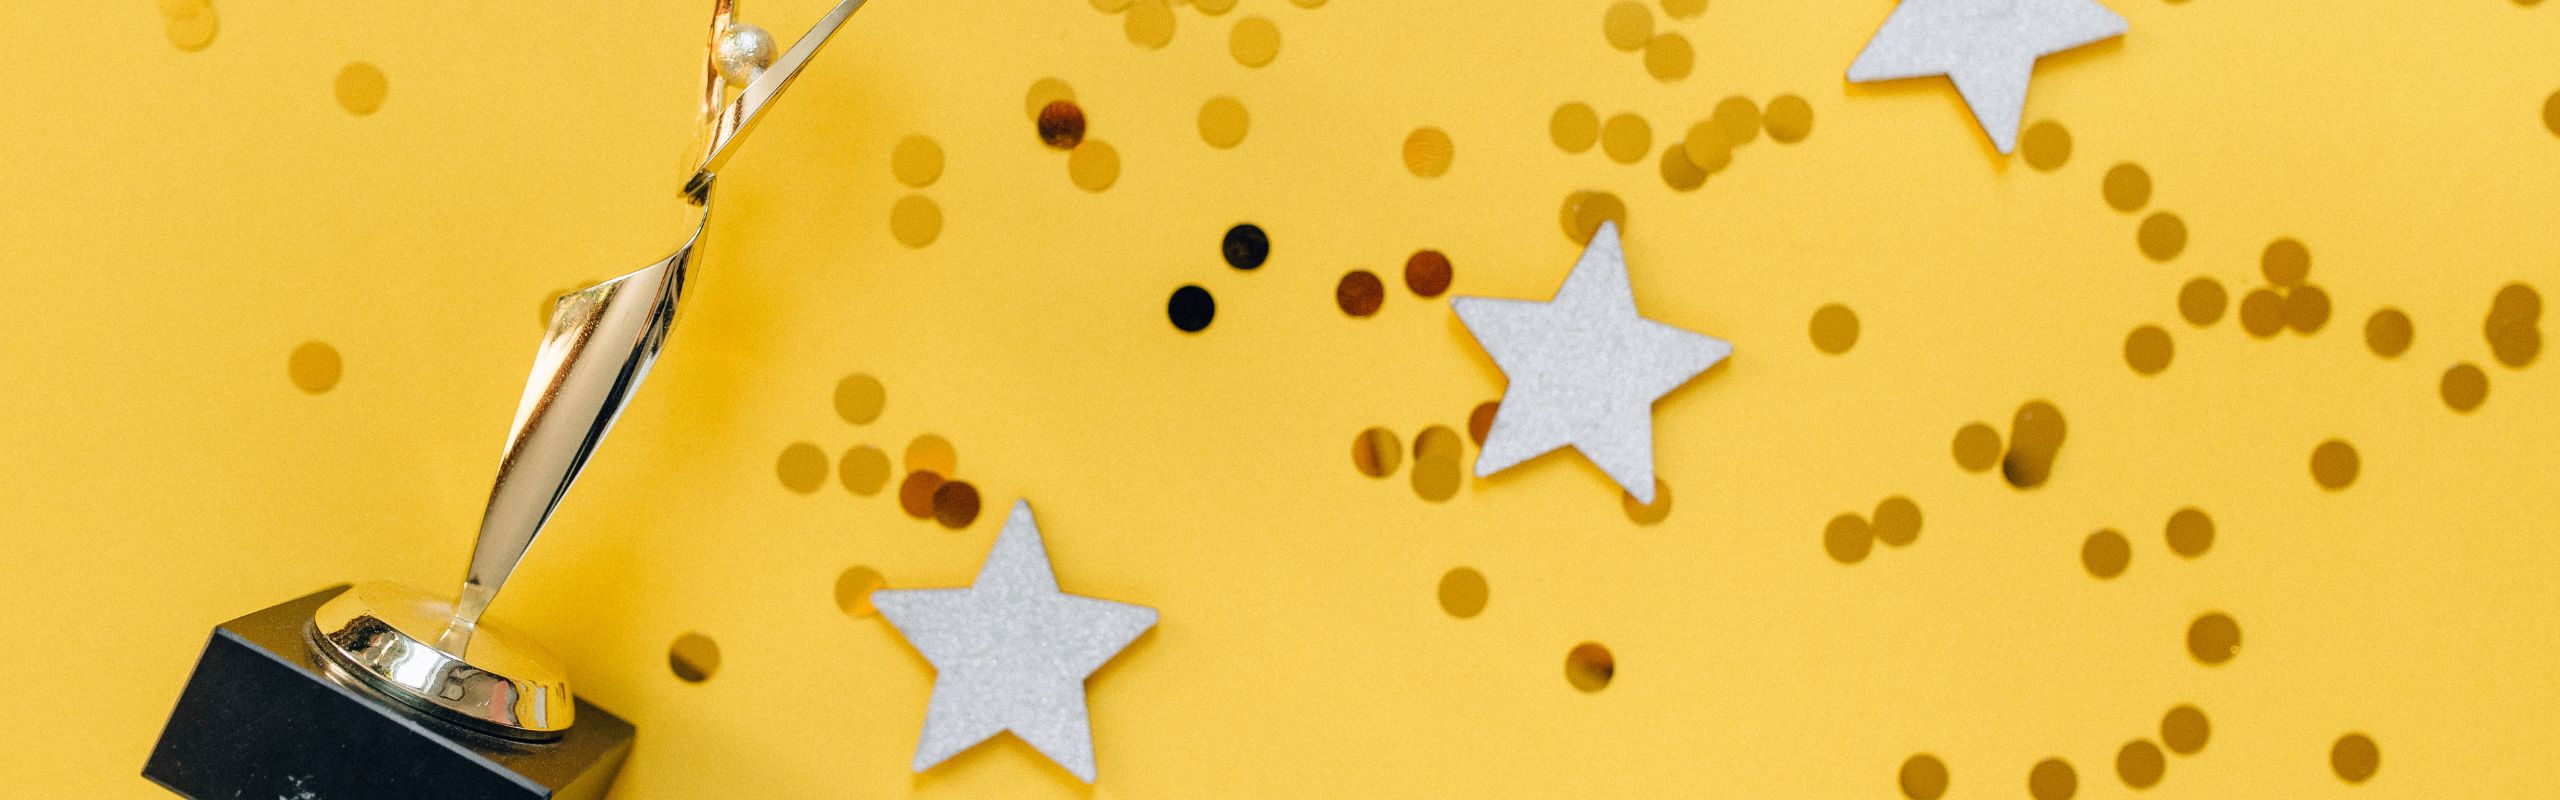 Image of a trophy with stars against a yellow background